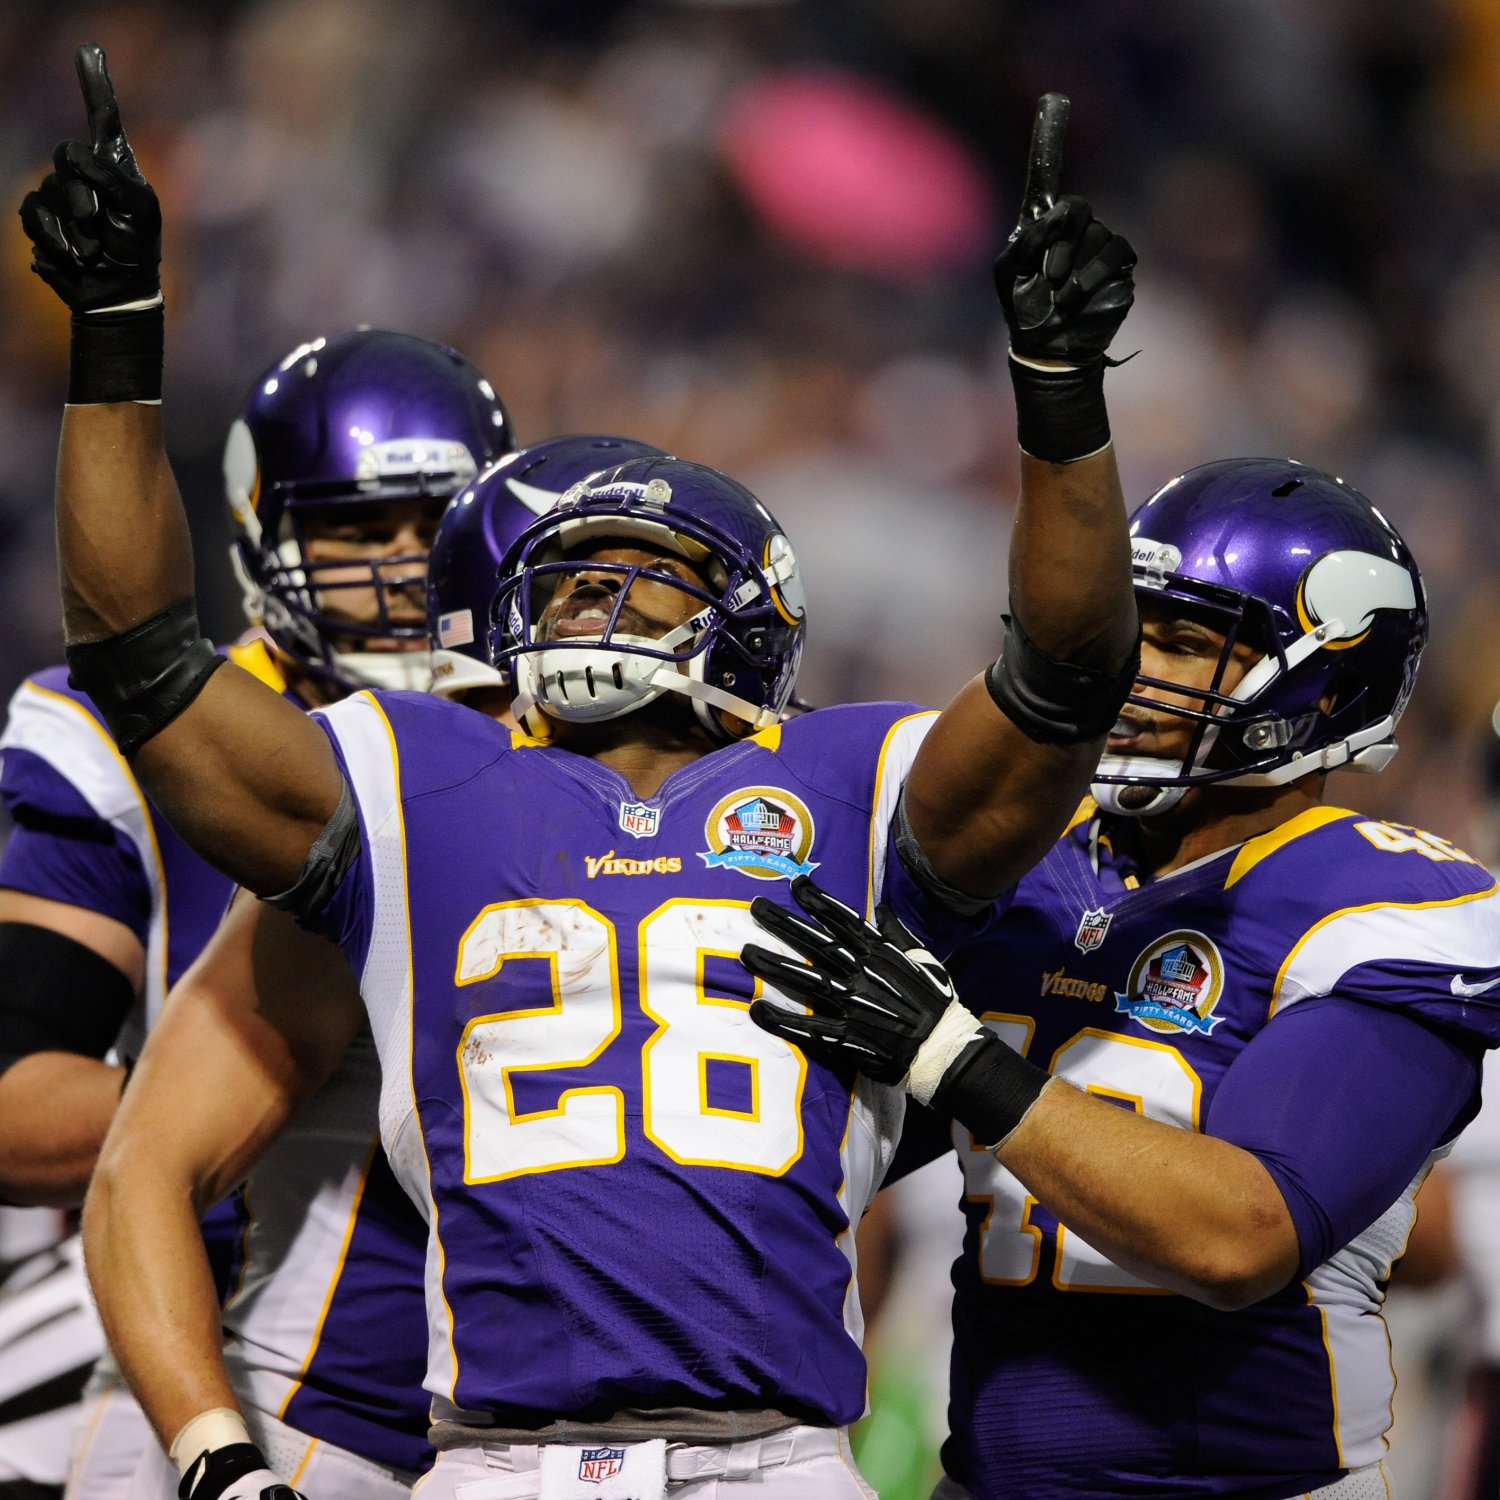 Minnesota Vikings 2013 Schedule WinLoss Predictions for Every Game